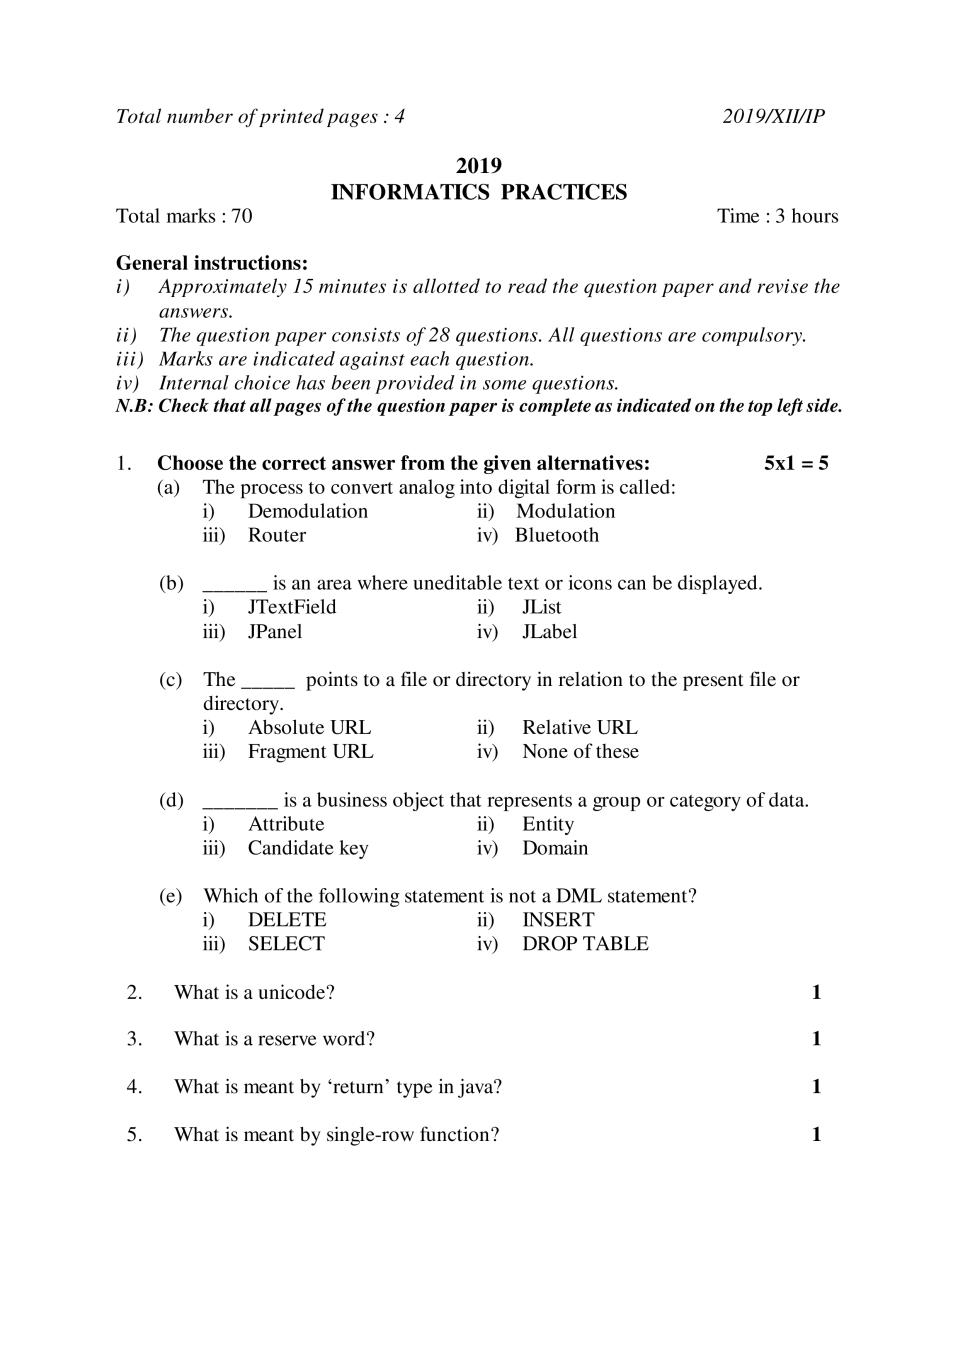 NBSE Class 12 Question Paper 2019 for Informatic Pratices - Page 1